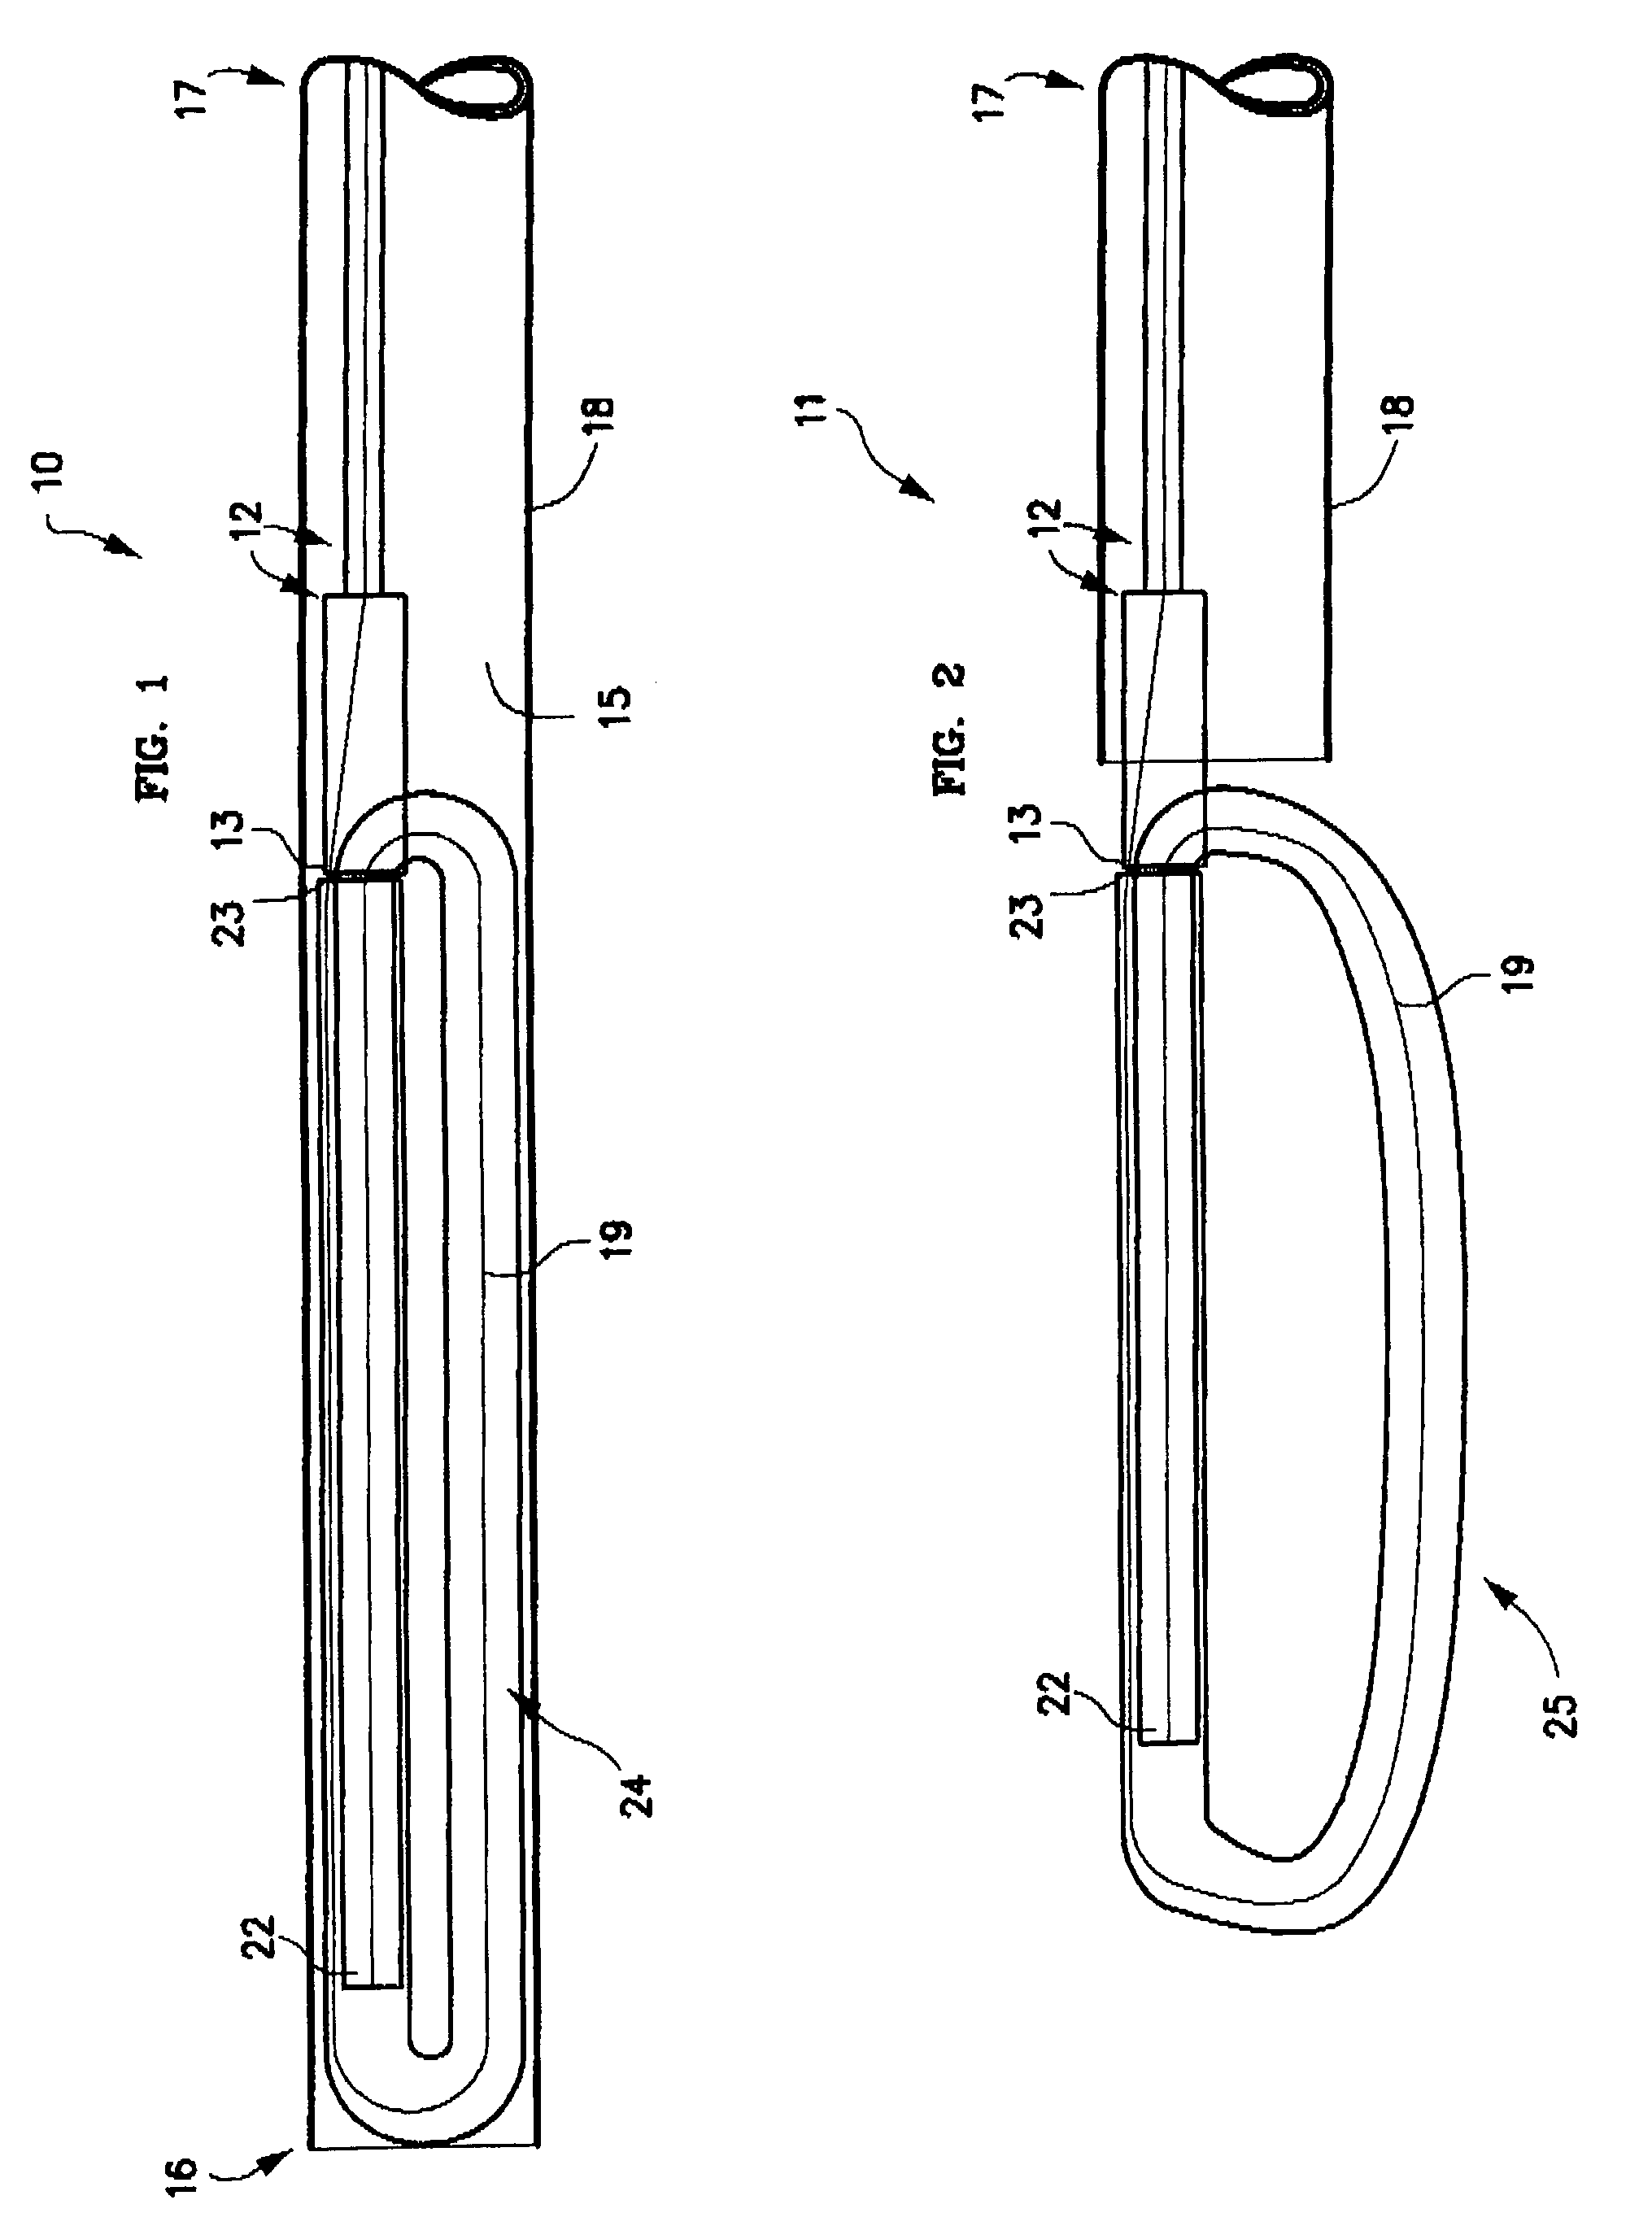 Mechanical apparatus and method for artificial disc replacement